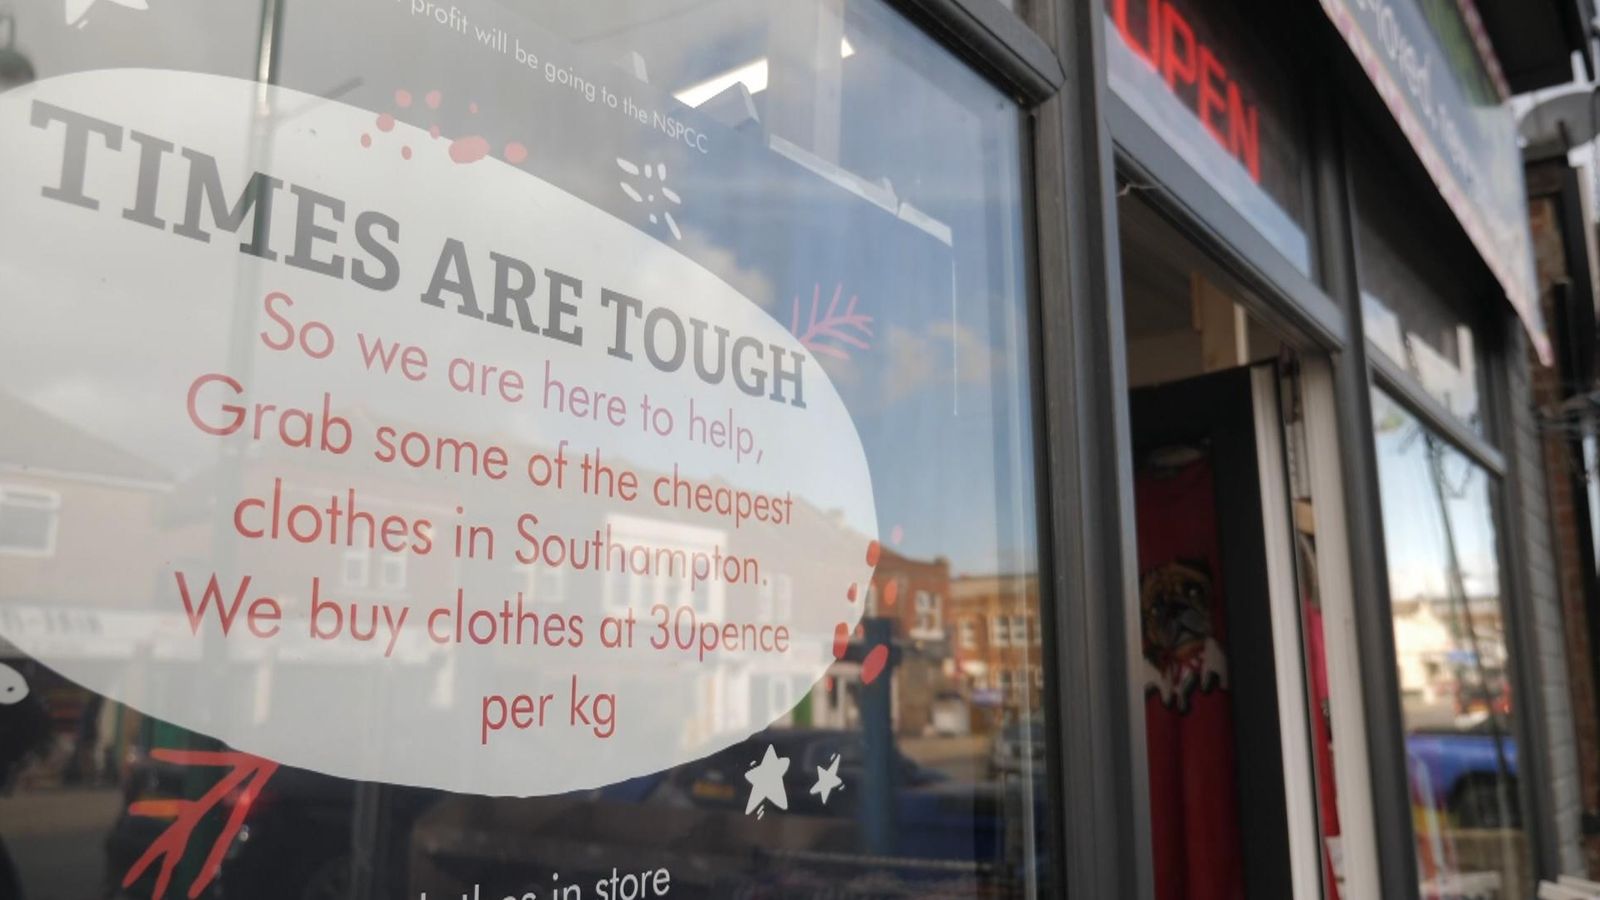 Rishi Sunak's 'tough decisions' evident in his home town of Southampton